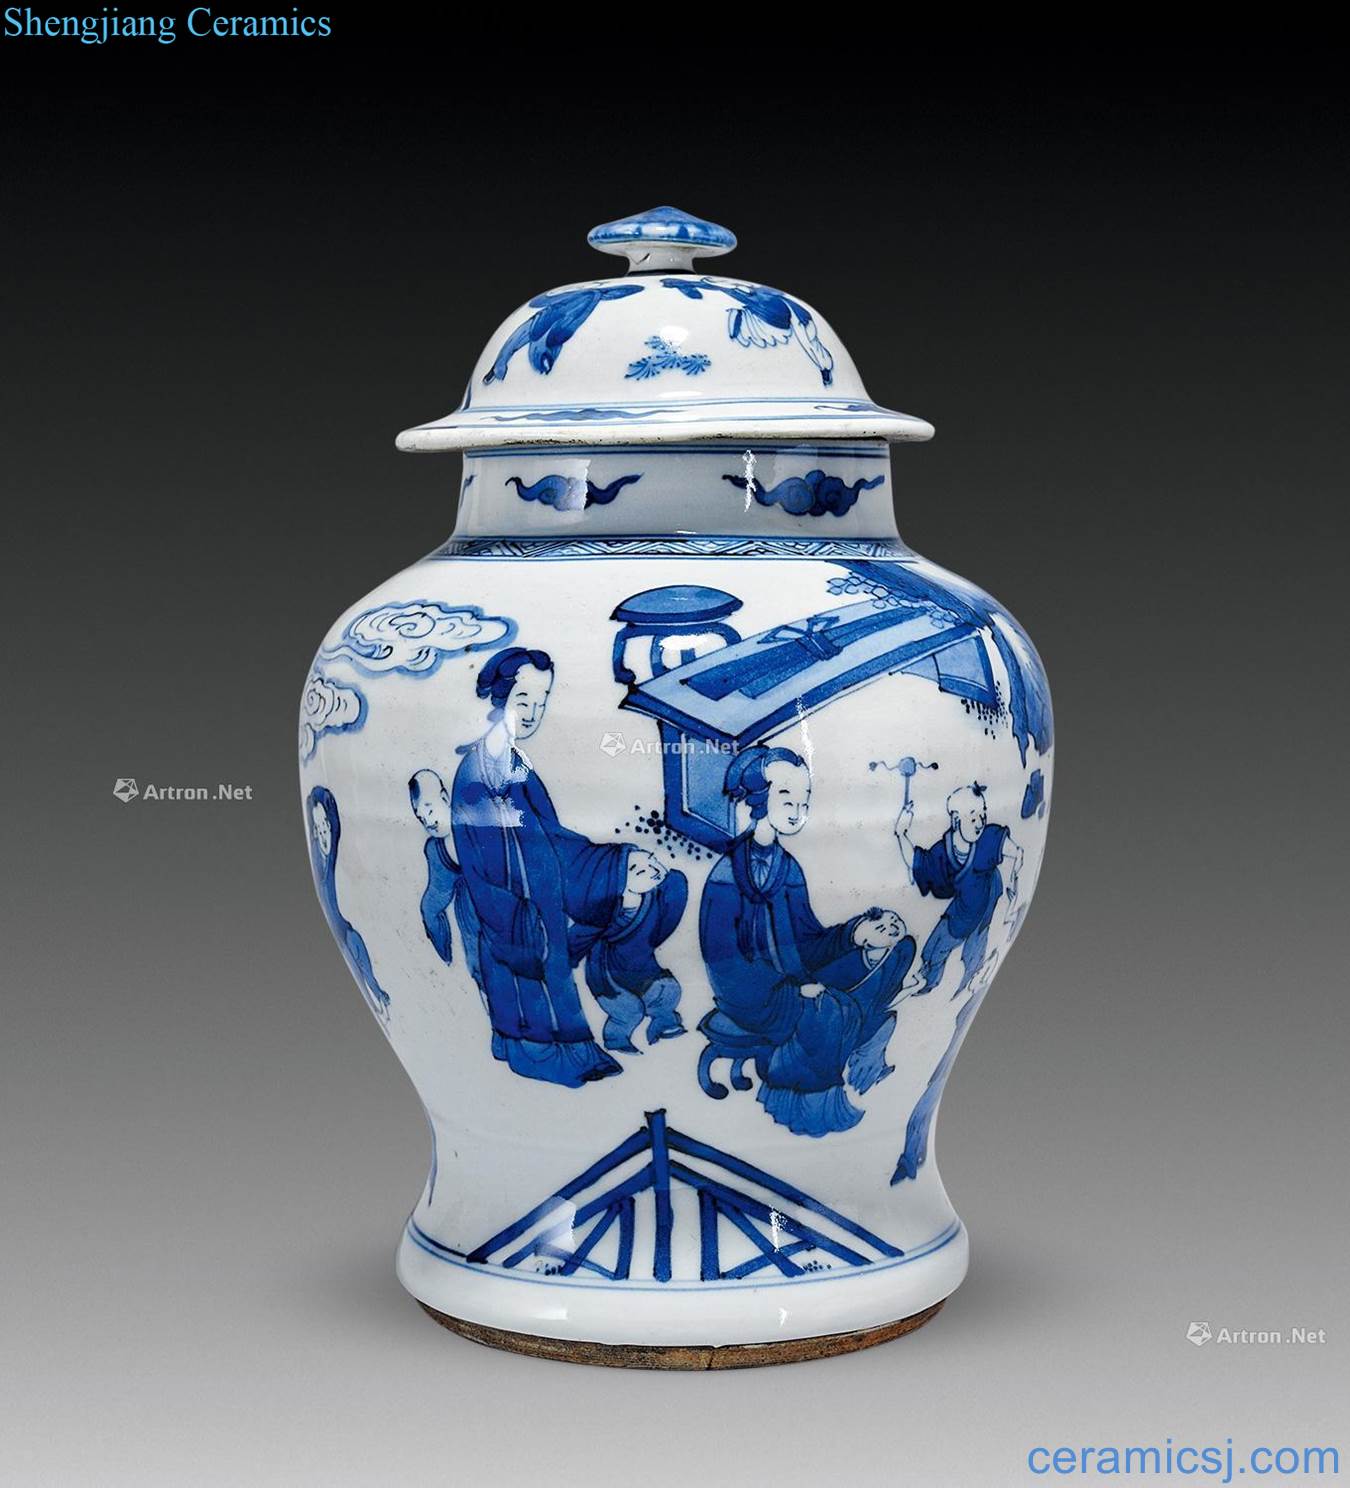 In the qing dynasty blue and white baby play figure cans